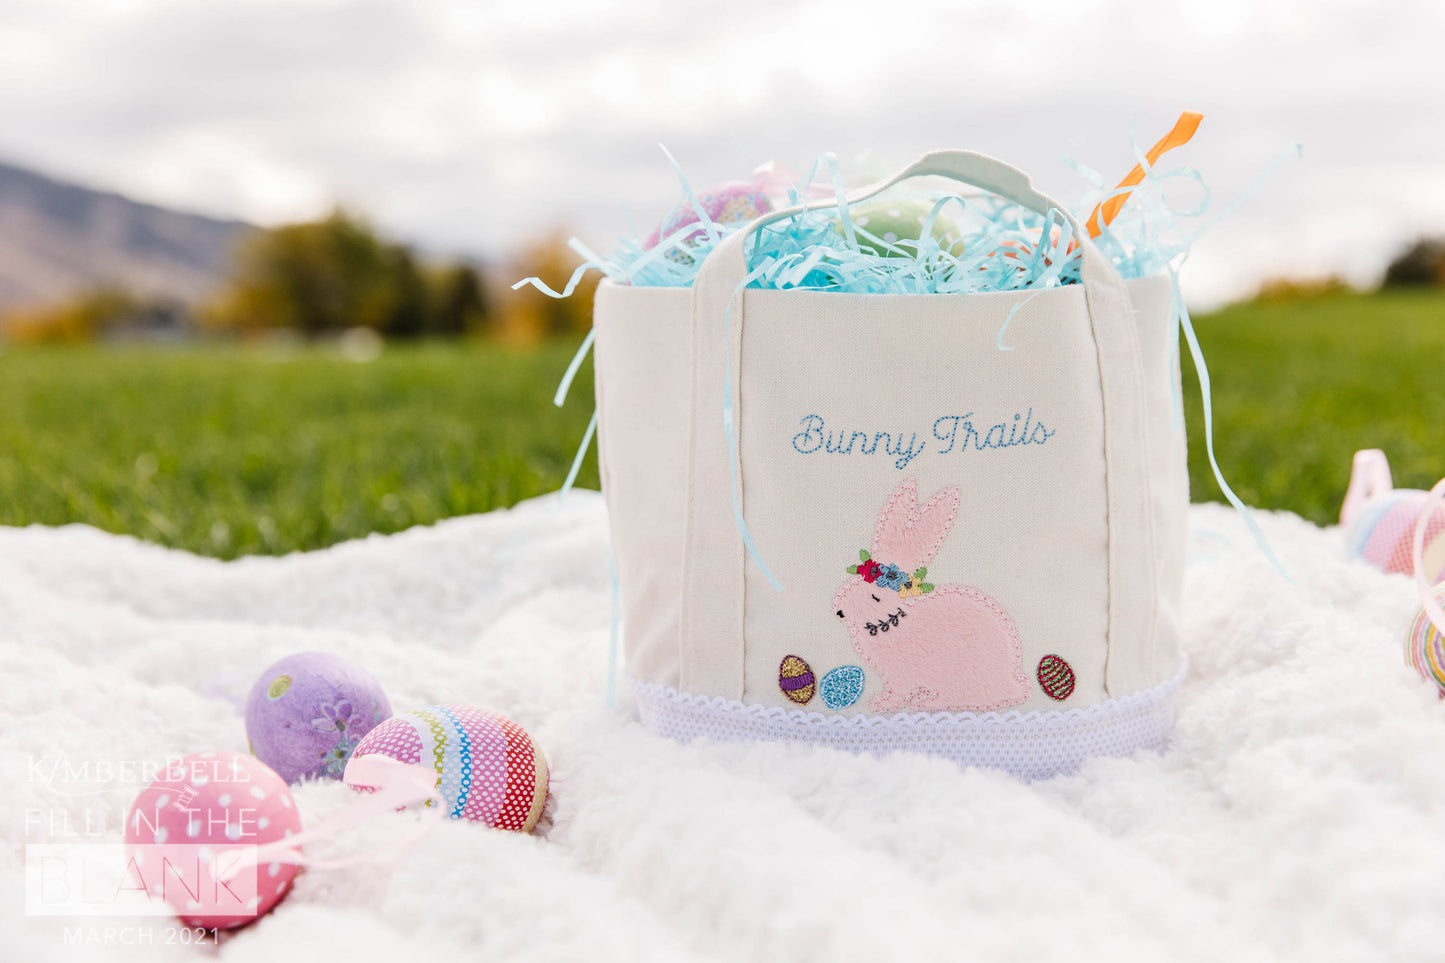 KimberBell Fill in the blank - Canvas tote 12”x 15” Plus free Easter design!